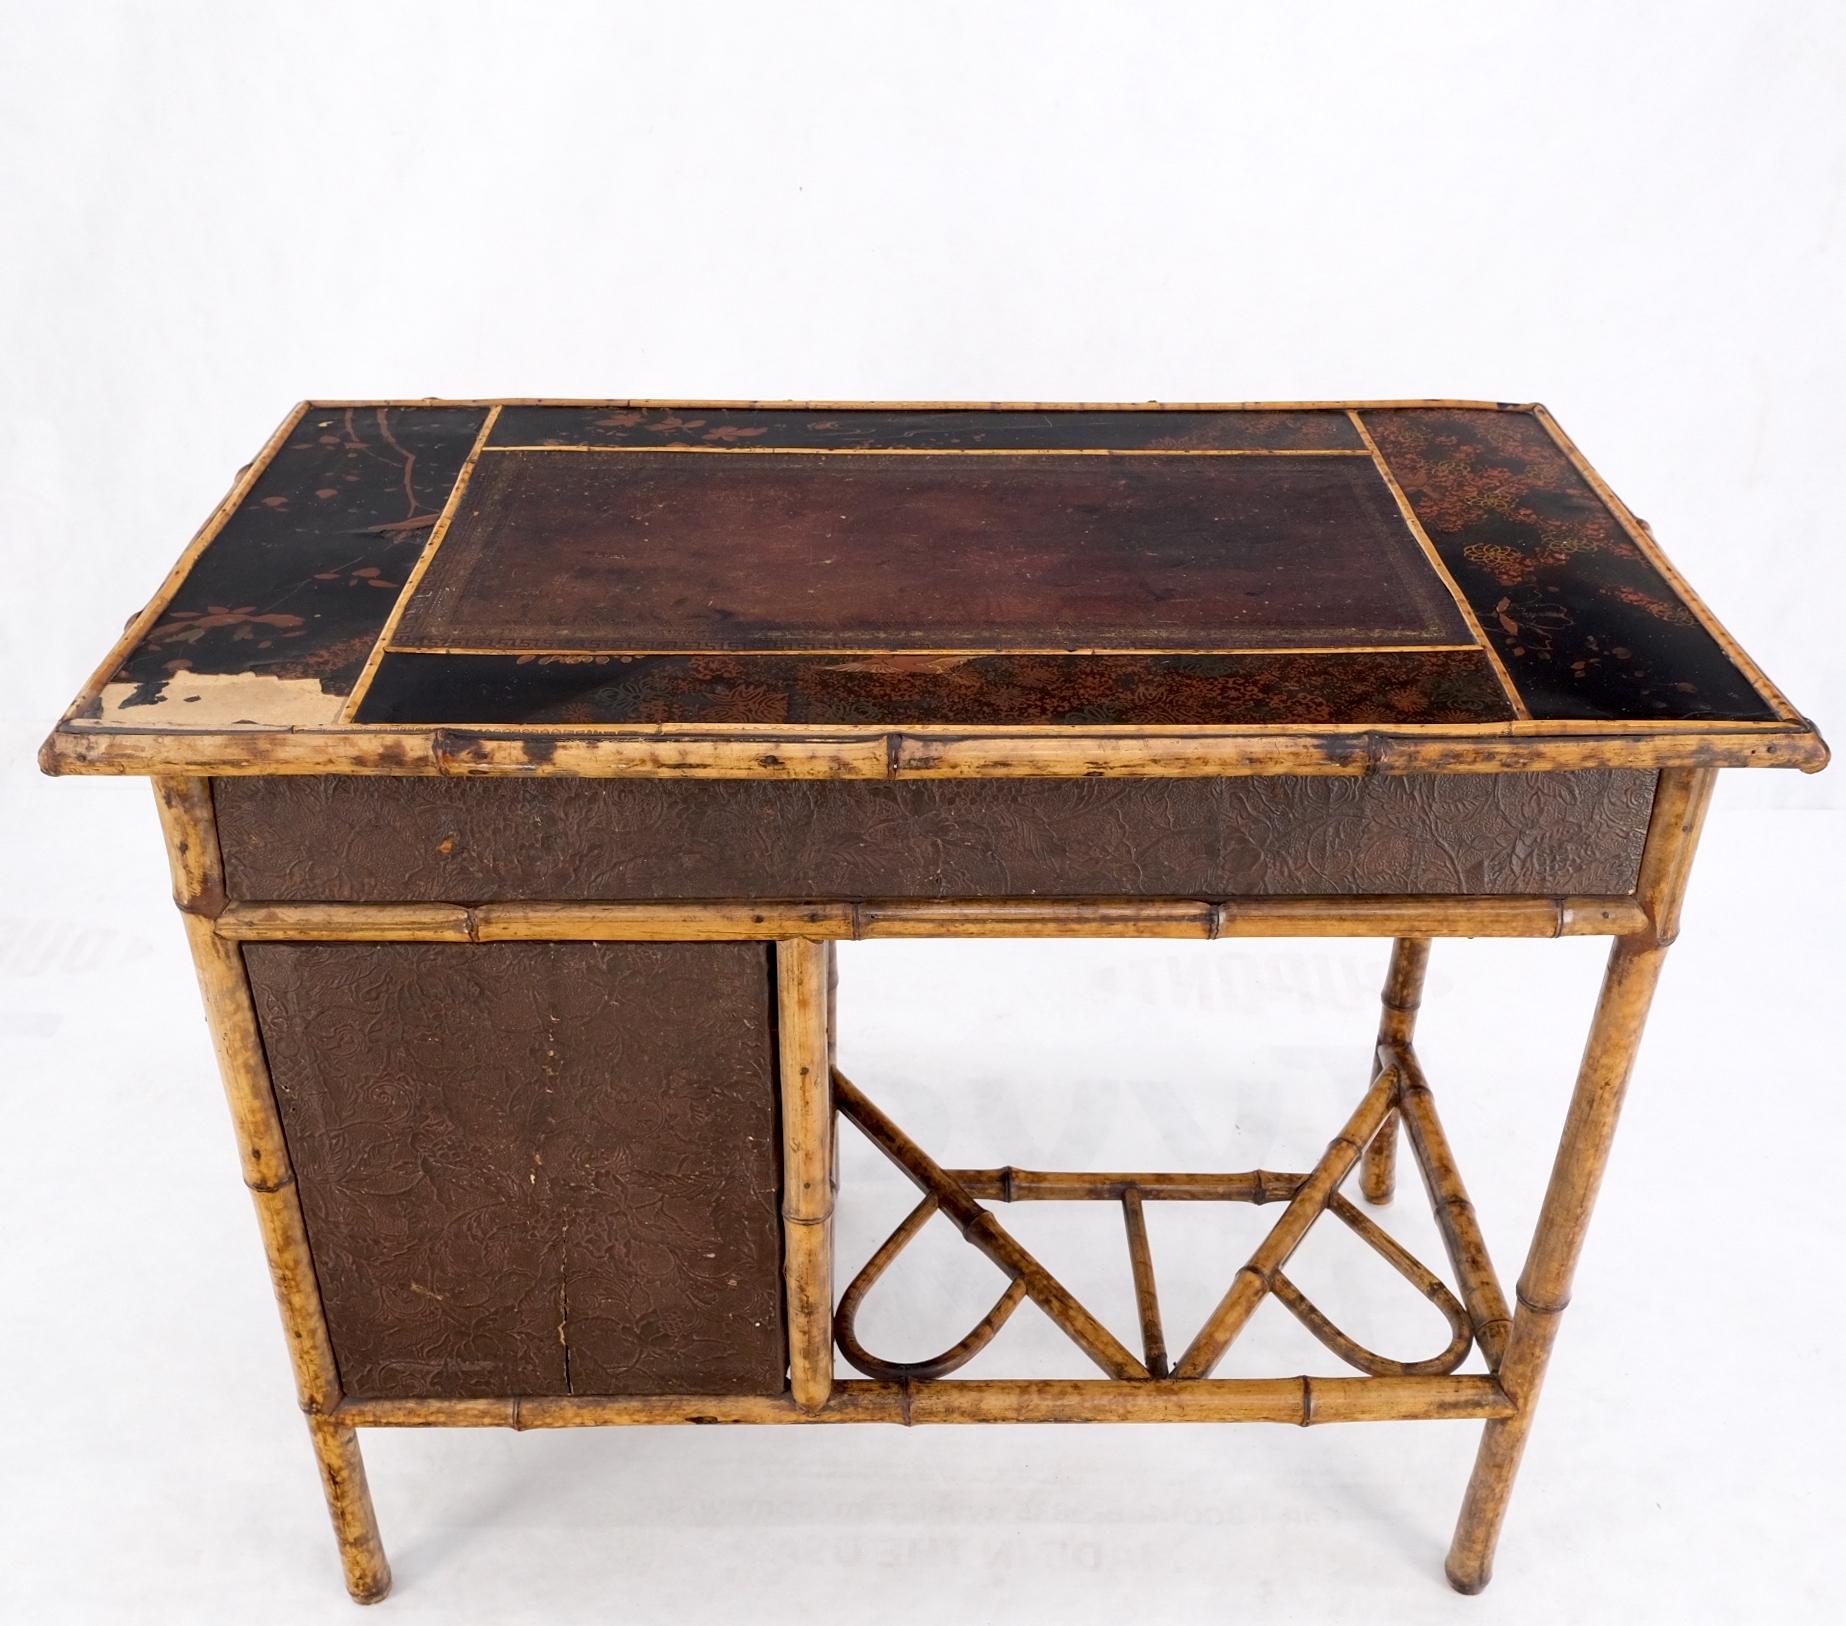 Antique Asian Oriental japaneese Burned Bamboo Hand Painted Decorated Desk Table For Sale 2